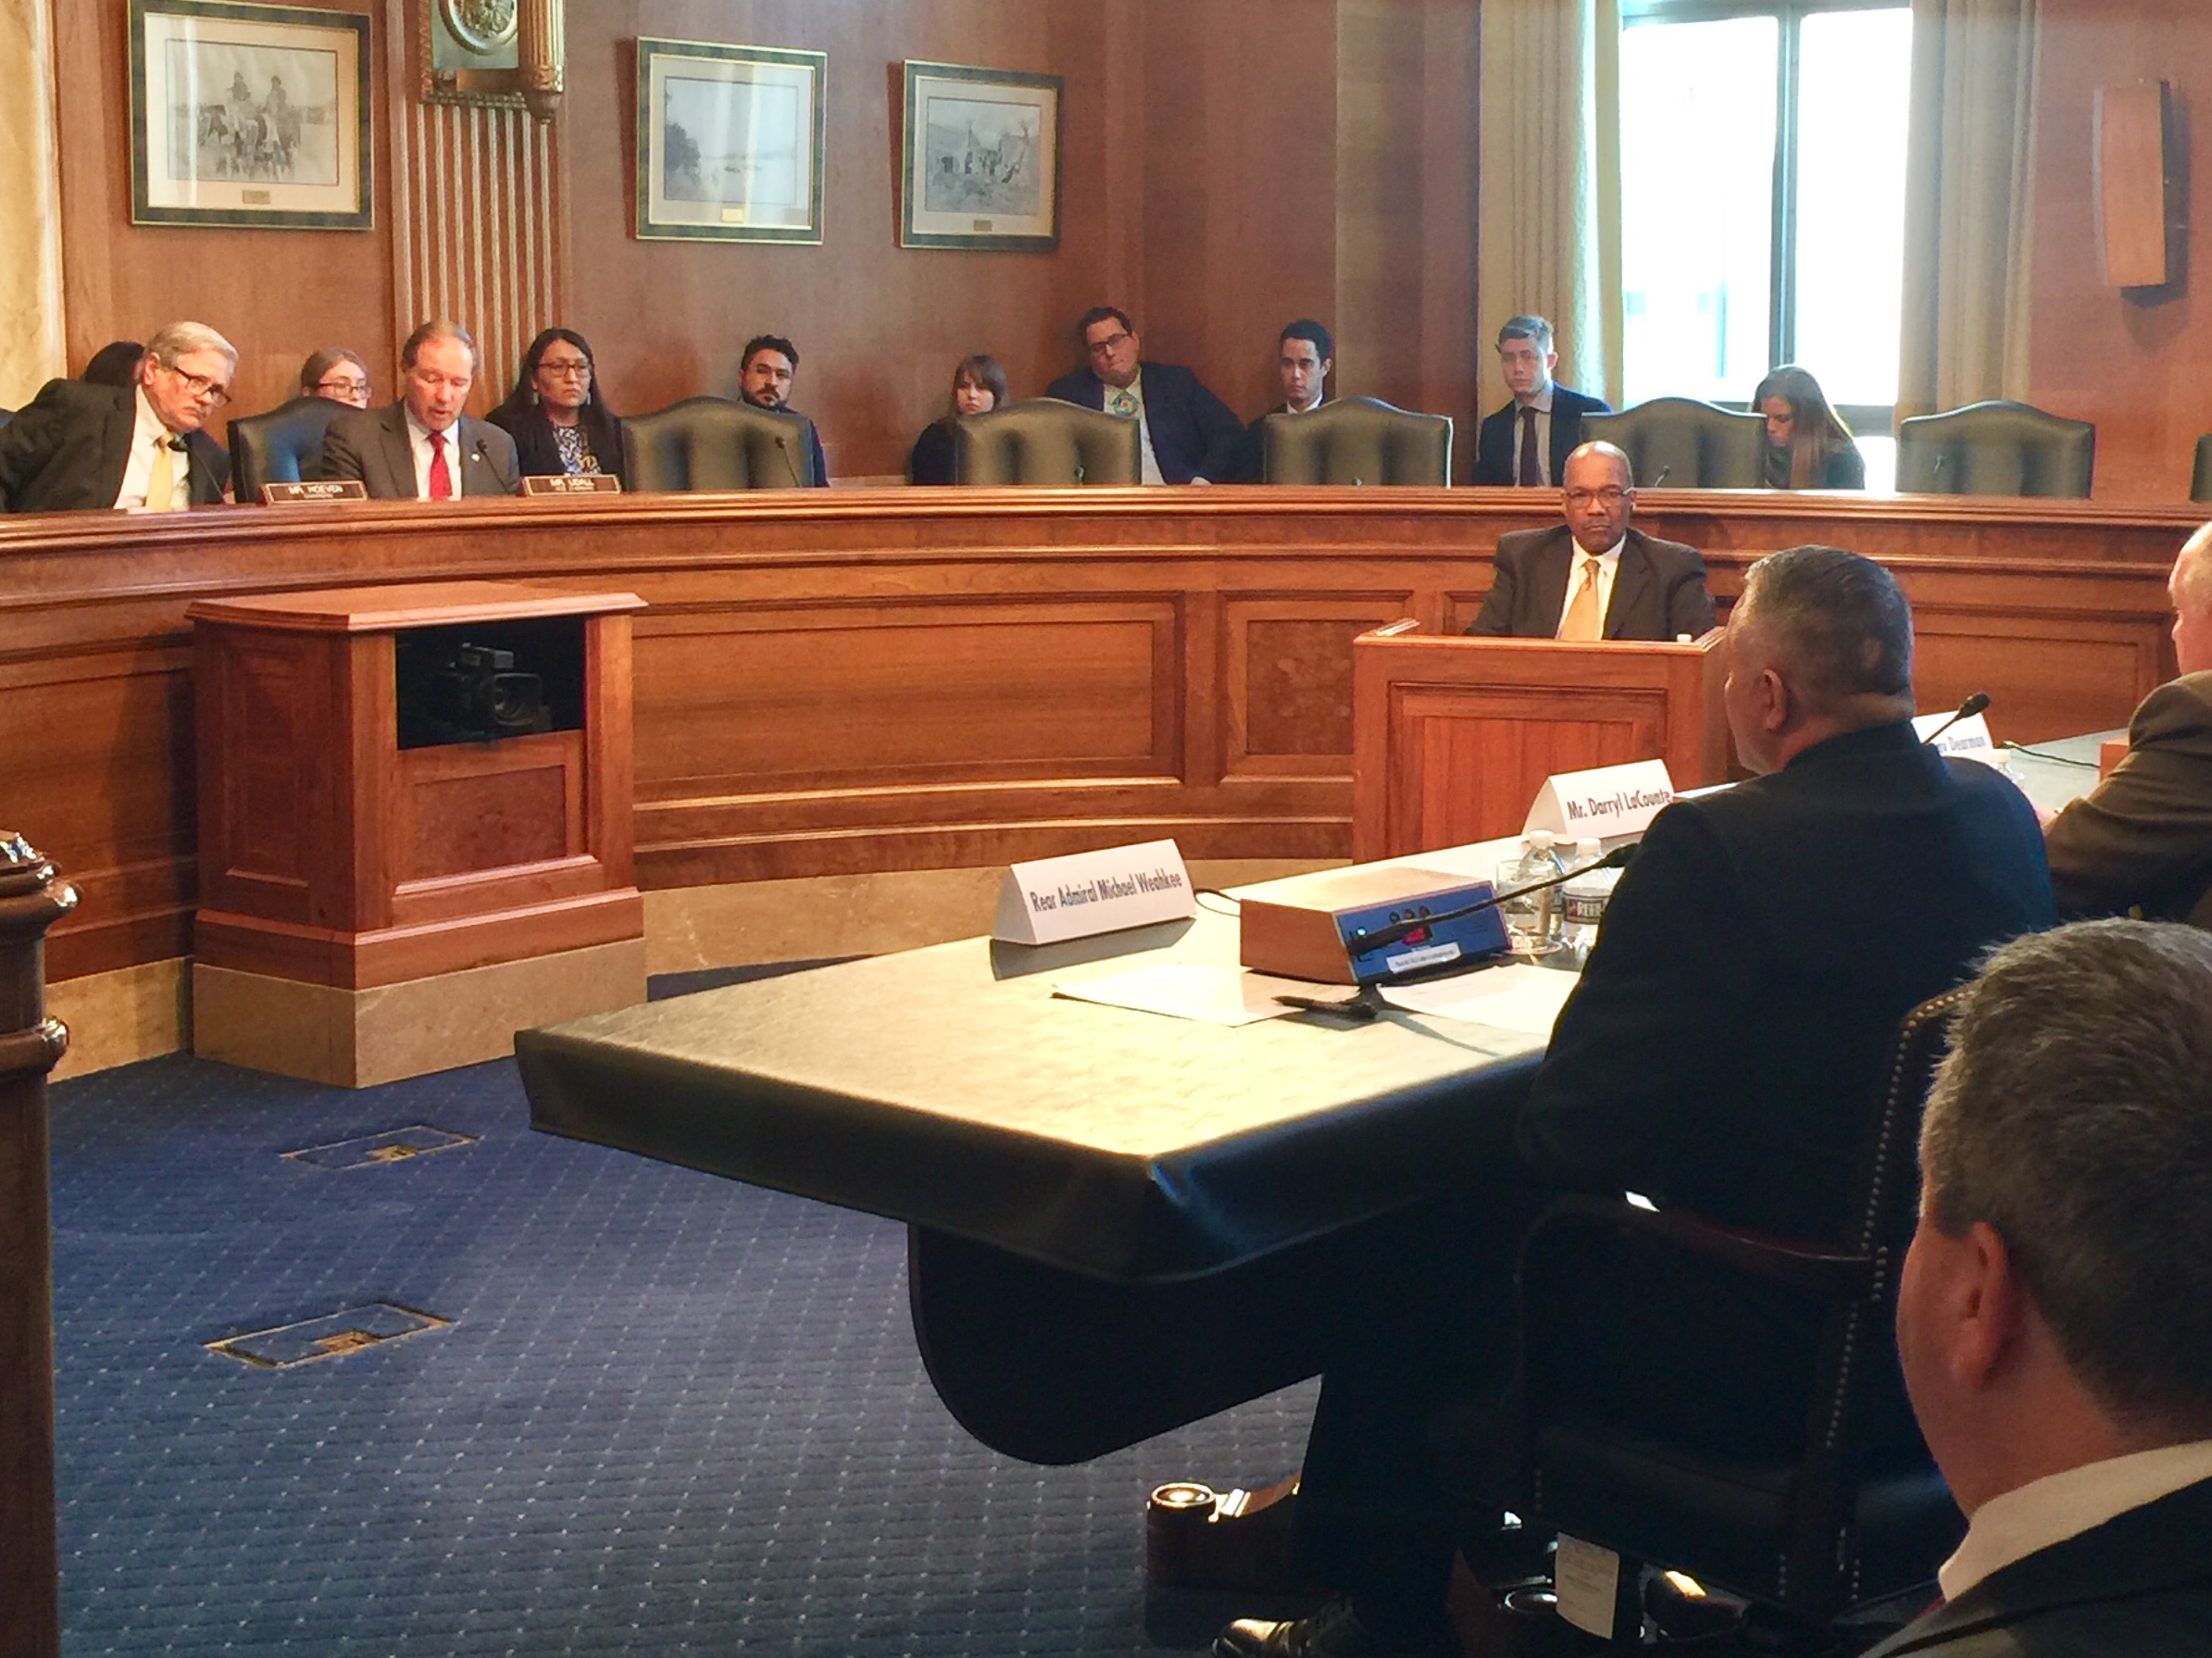 Rear Adm. Michael Weahkee, IHS principal deputy director, testifies before the Senate Committee on Indian Affairs in Washington, D.C., March 12, 2019.